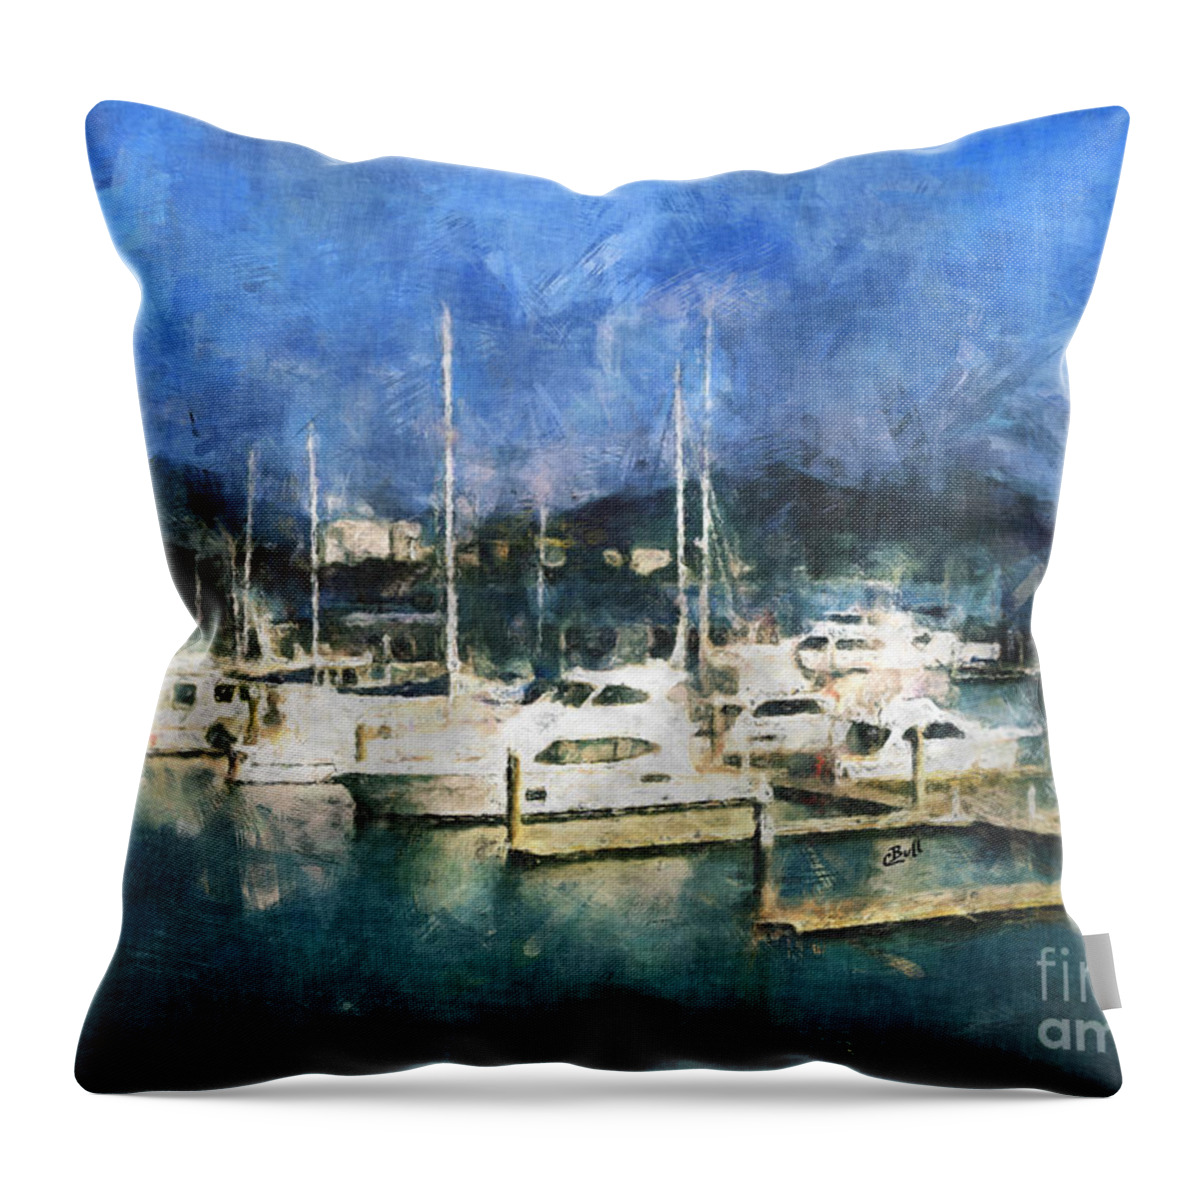 Boats Throw Pillow featuring the photograph Queensland Marina by Claire Bull